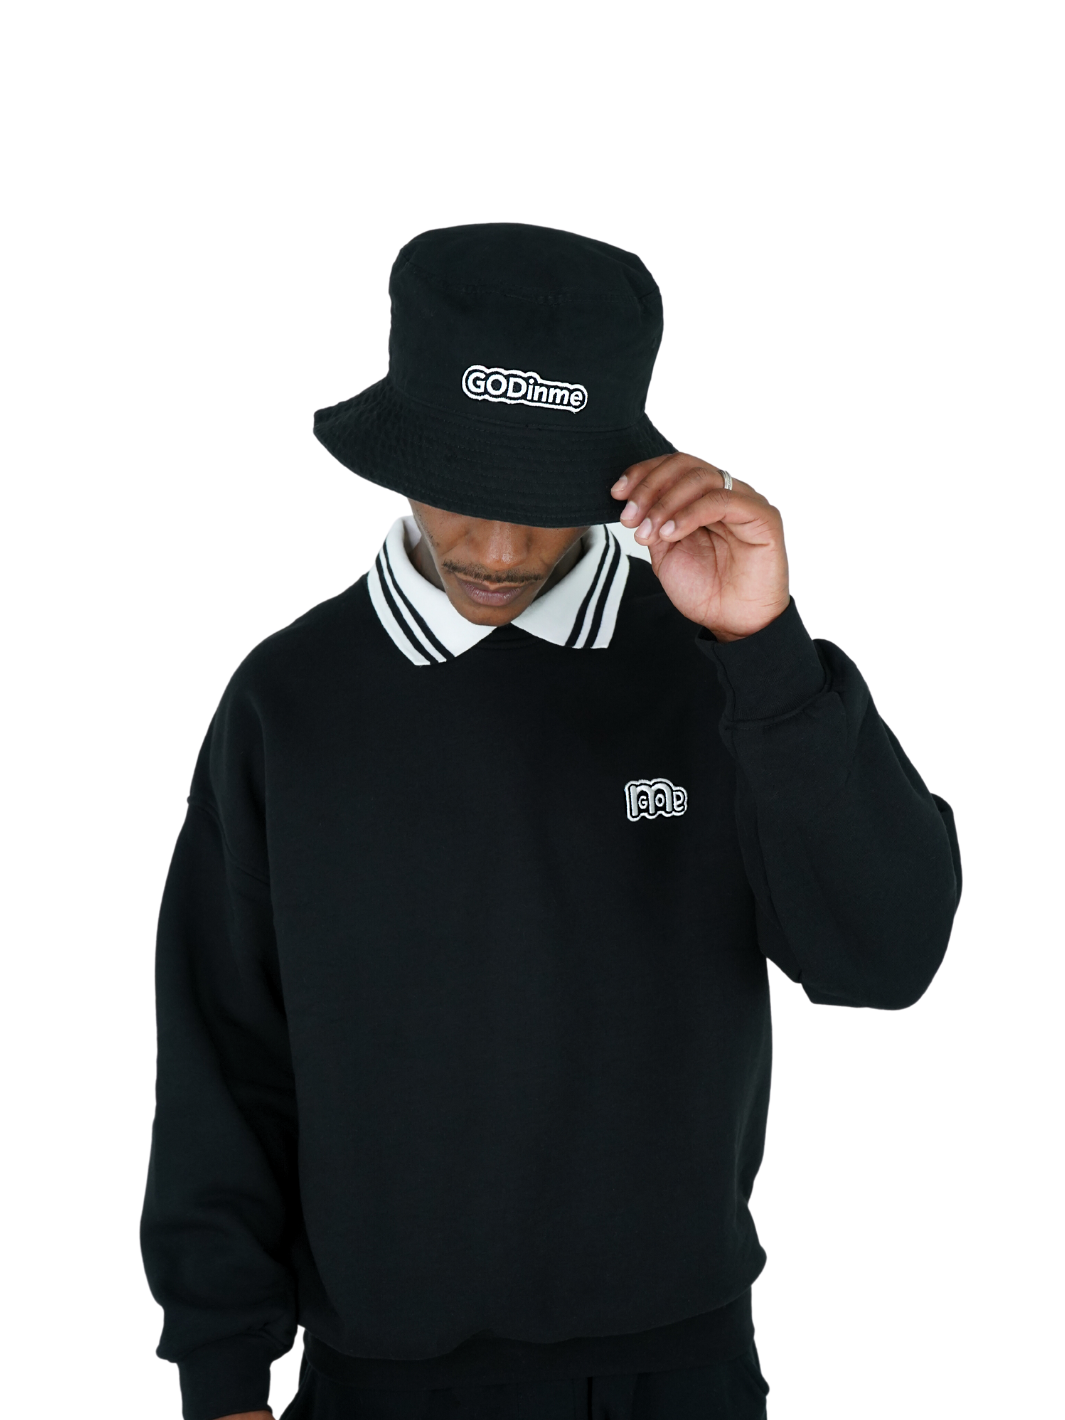 Represent your timeless style with this Black GODinme Bucket Hat featuring the iconic GODinme brand name and logo embroidered in White.